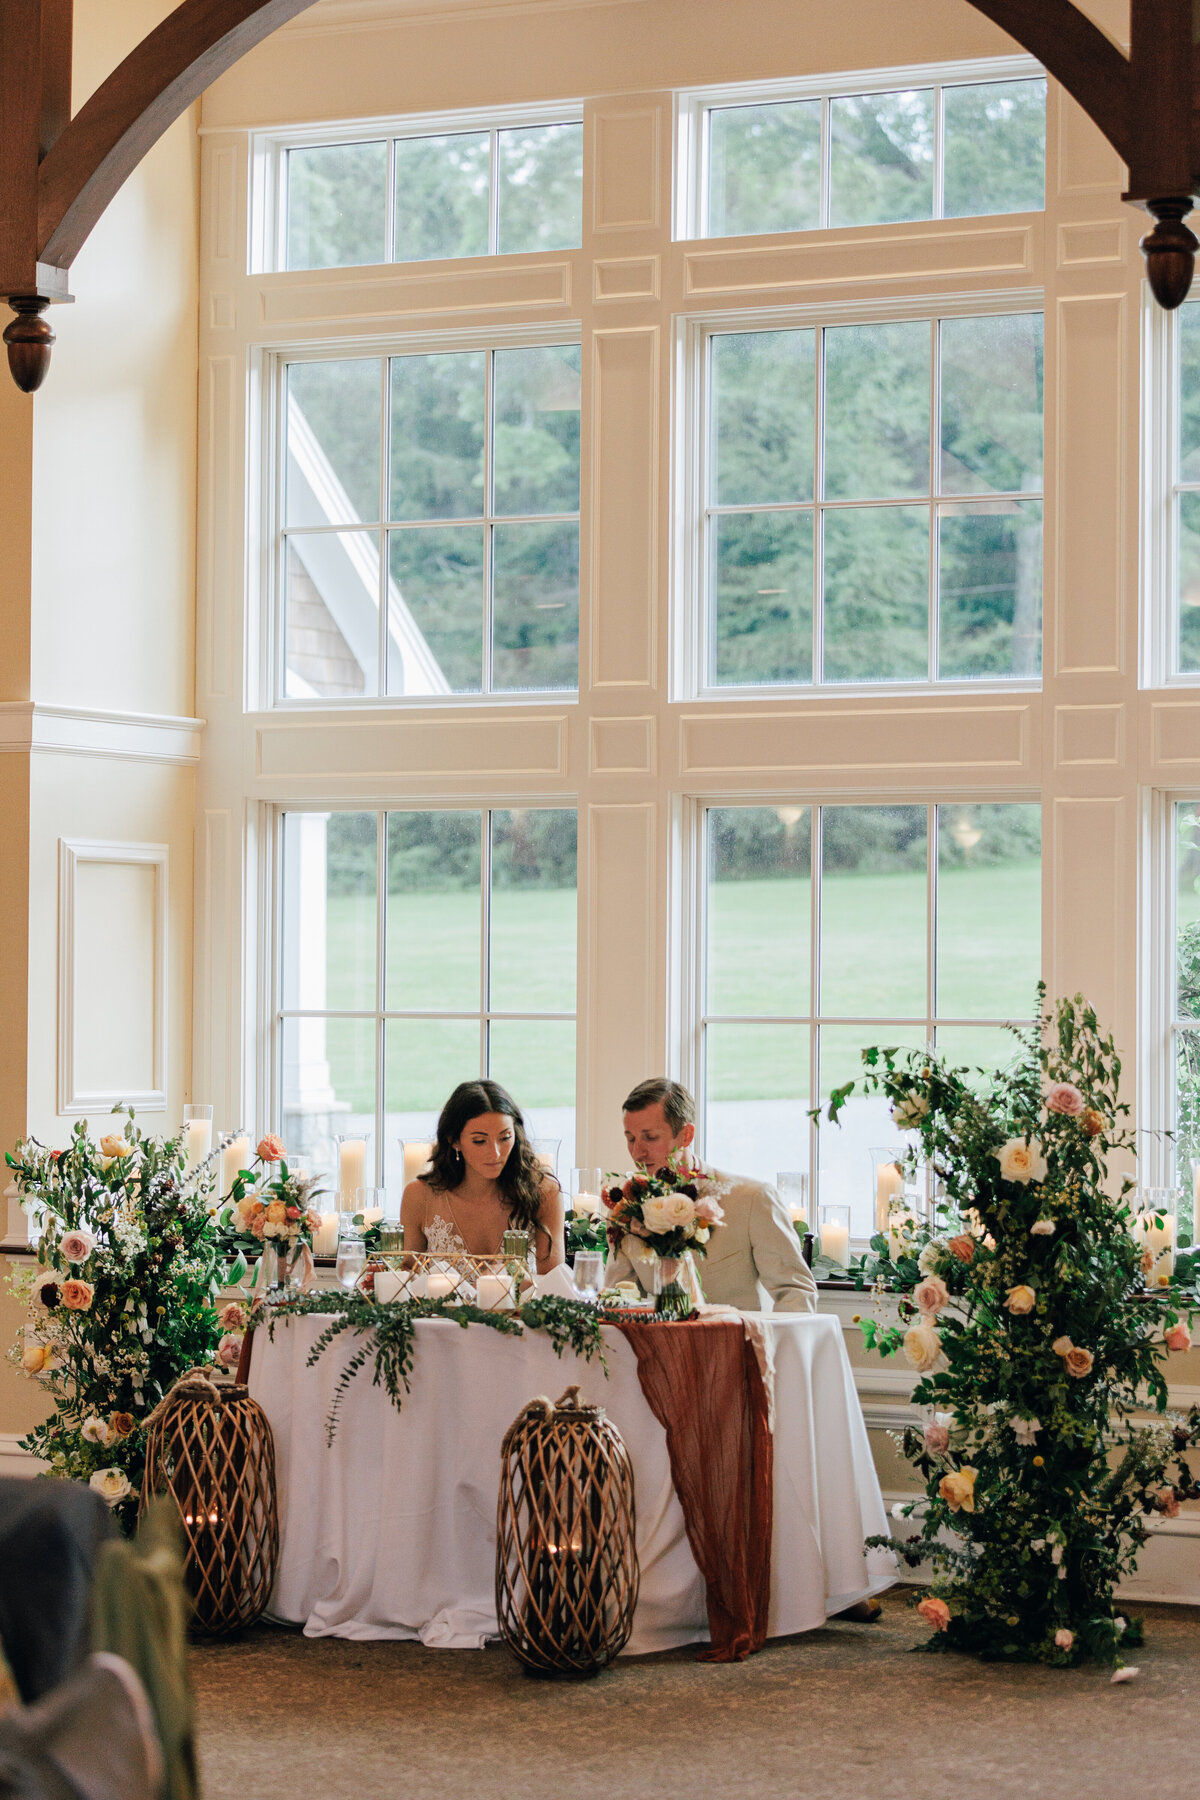 mansion-at-bald-hill-woodstock-ct-wedding-flowers-sweetheart-table-petals-plates-60